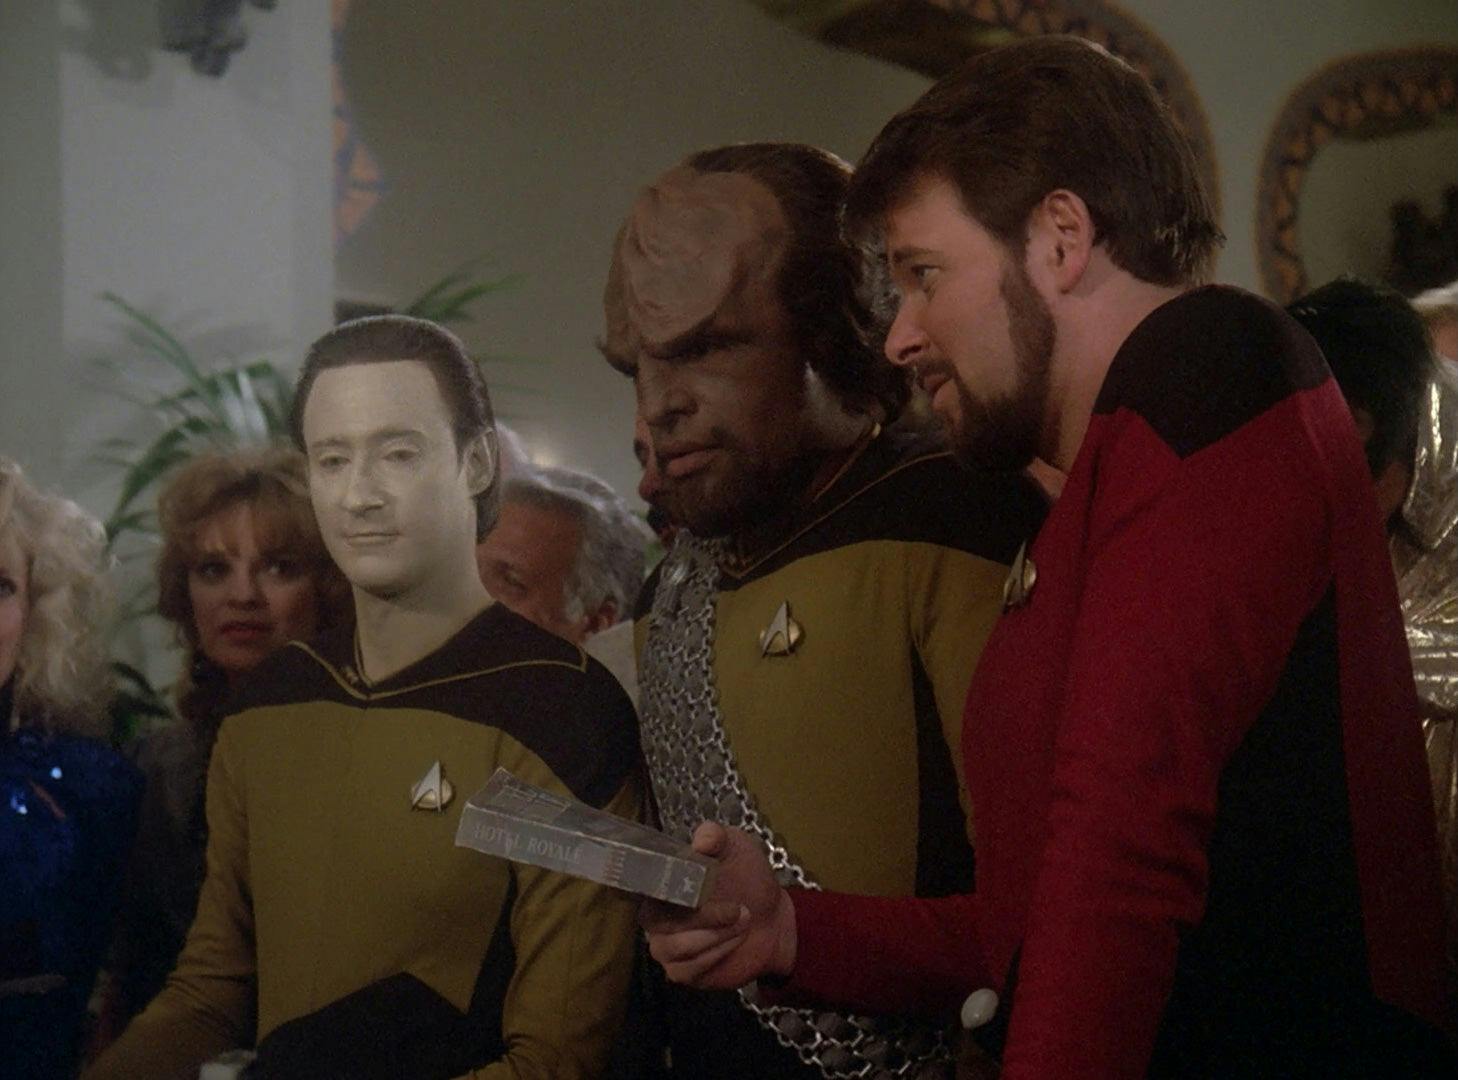 Data, Worf, and Riker hold a dusty copy of the book Hotel Royale in 'The Royale'